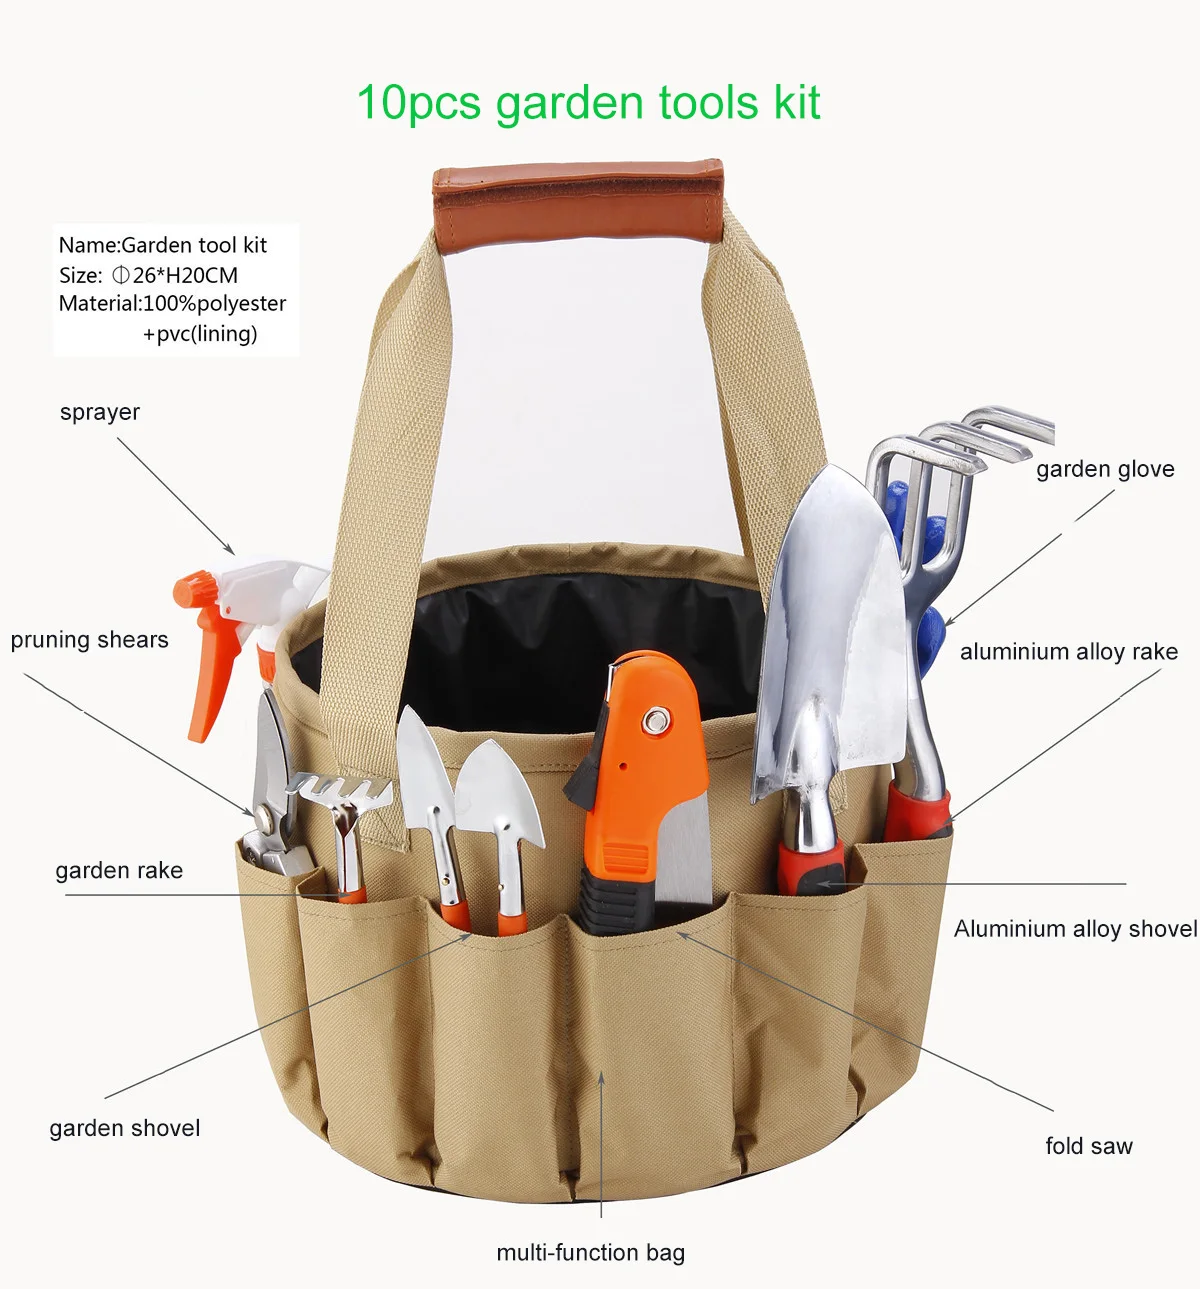 many types available household repair tool kits watch repair tool sets